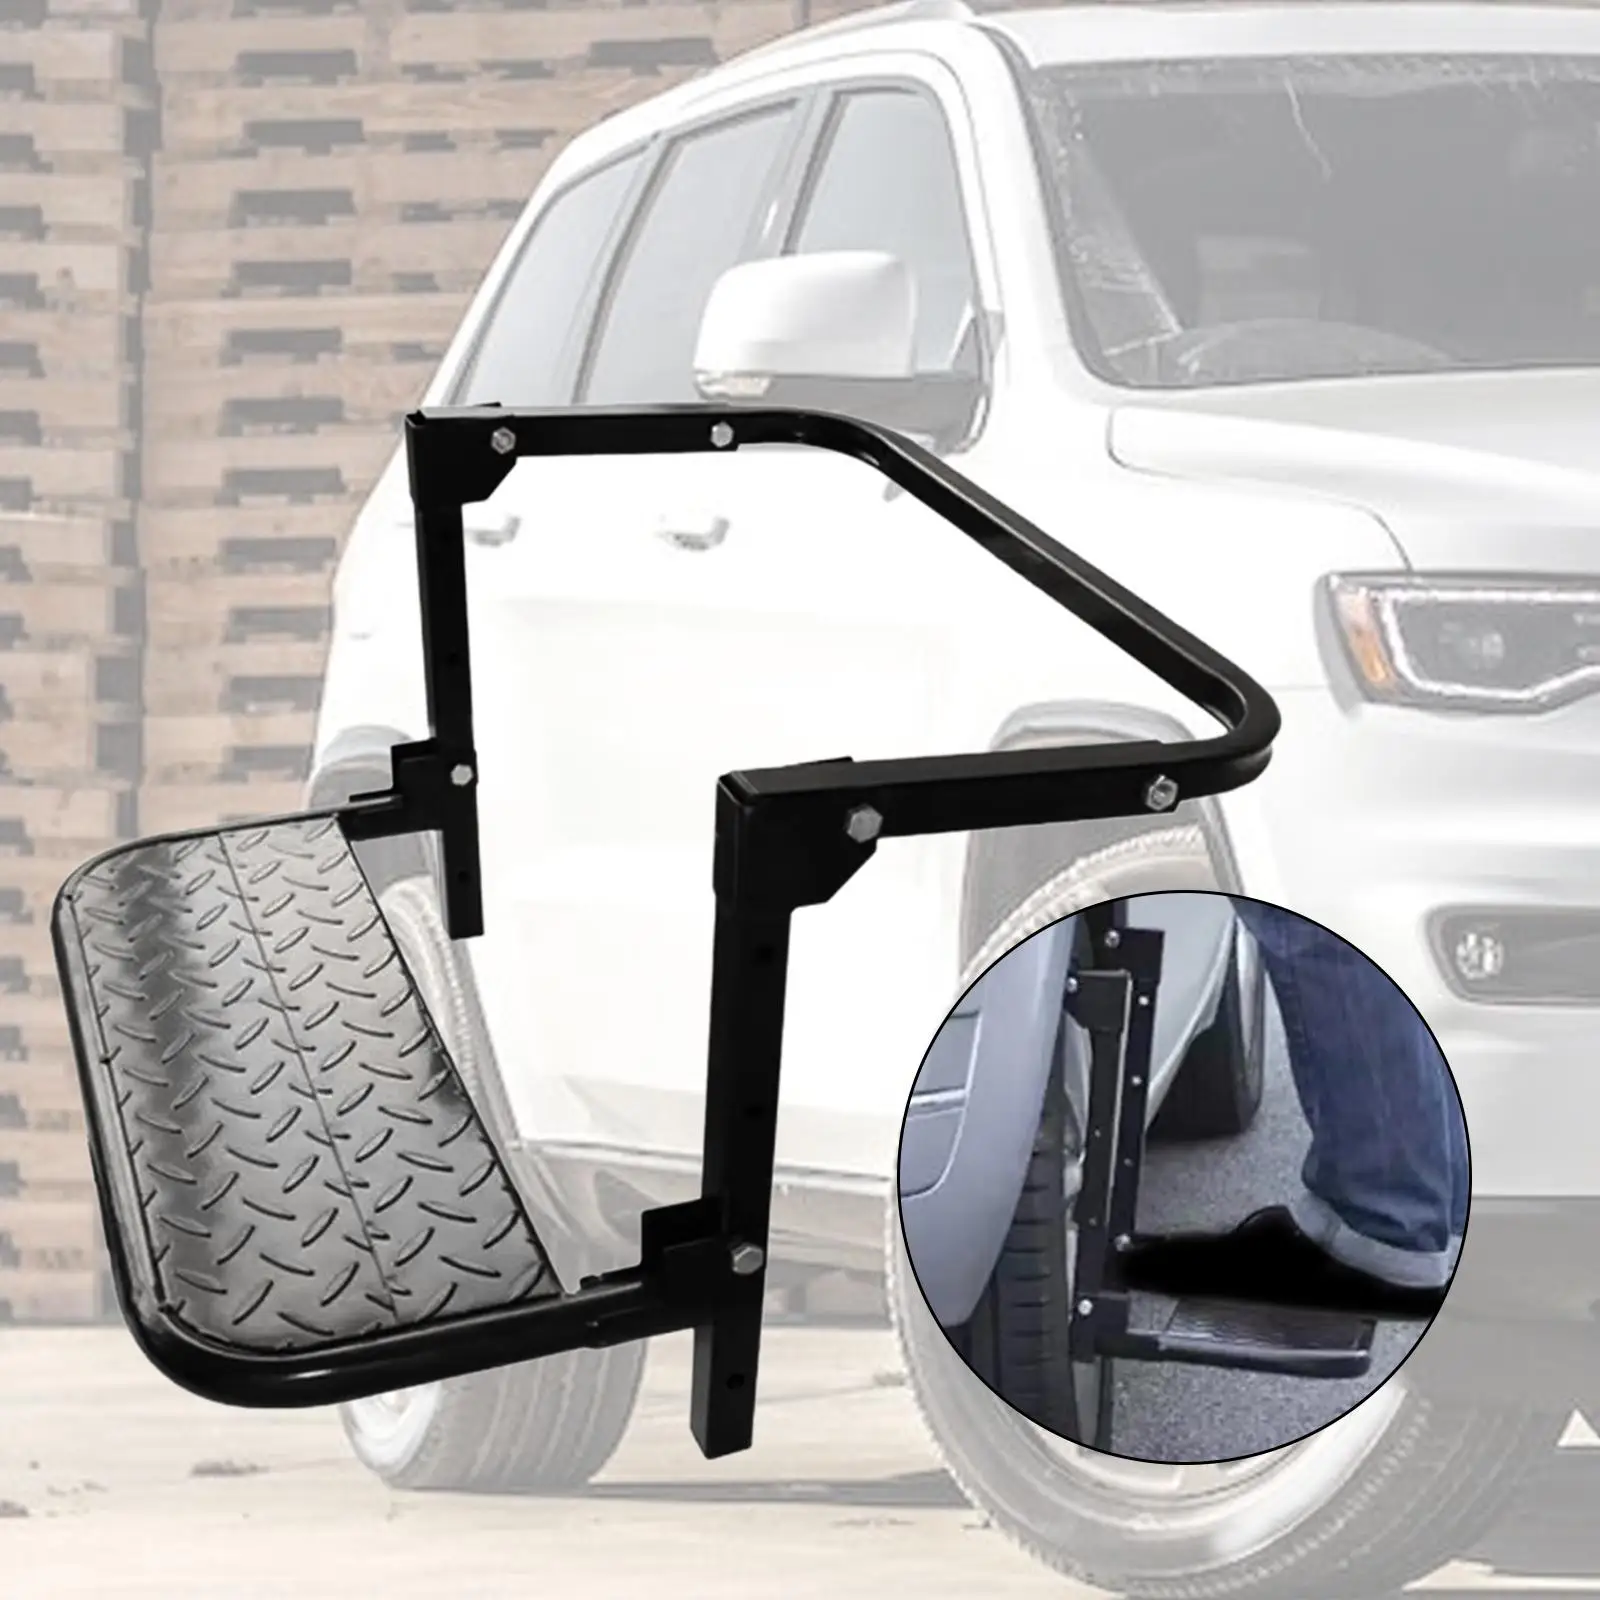 Foldable Tire Wheel Step Pedal Vehicle Heavy Duty Large Load Capacity, Trailer Auto Step, Car Portable Platform Stable Ladder